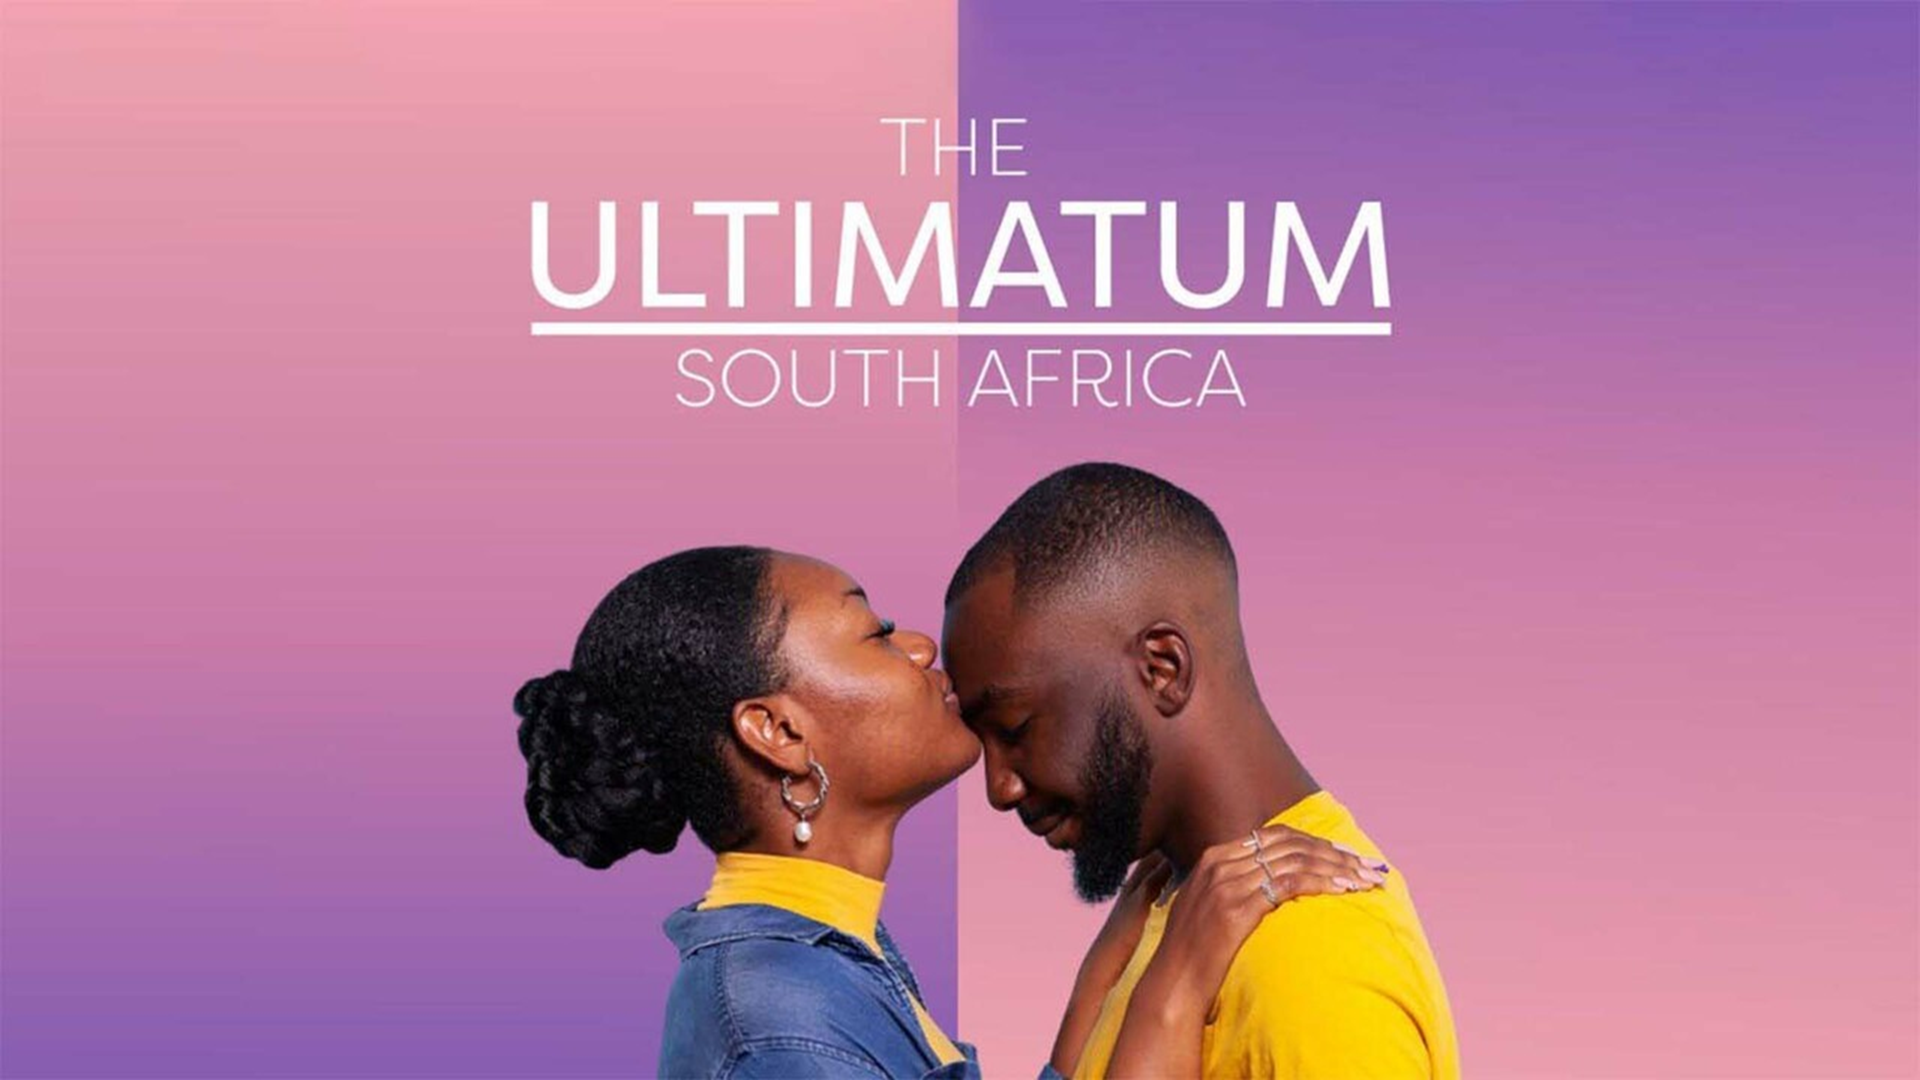 Show The Ultimatum: South Africa